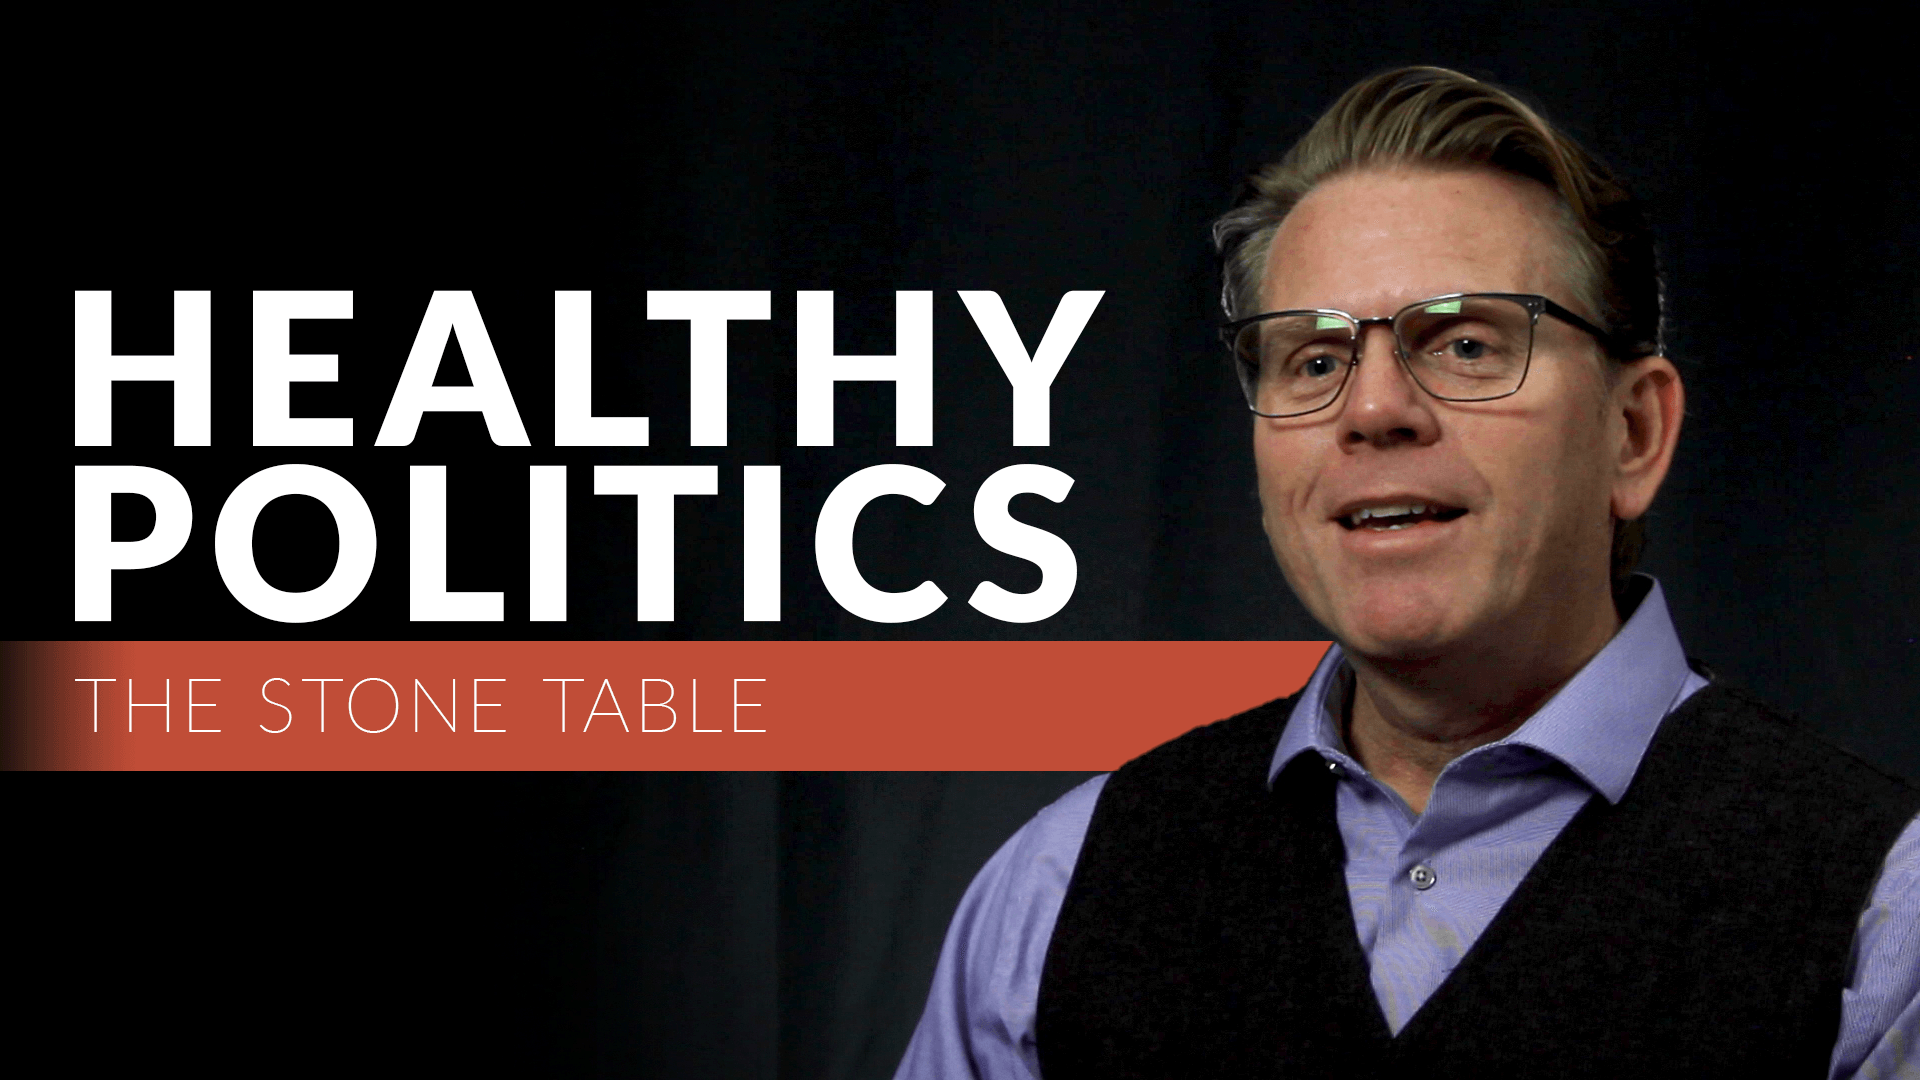 How Do People of Faith Engage In Politics In a Healthy Way?